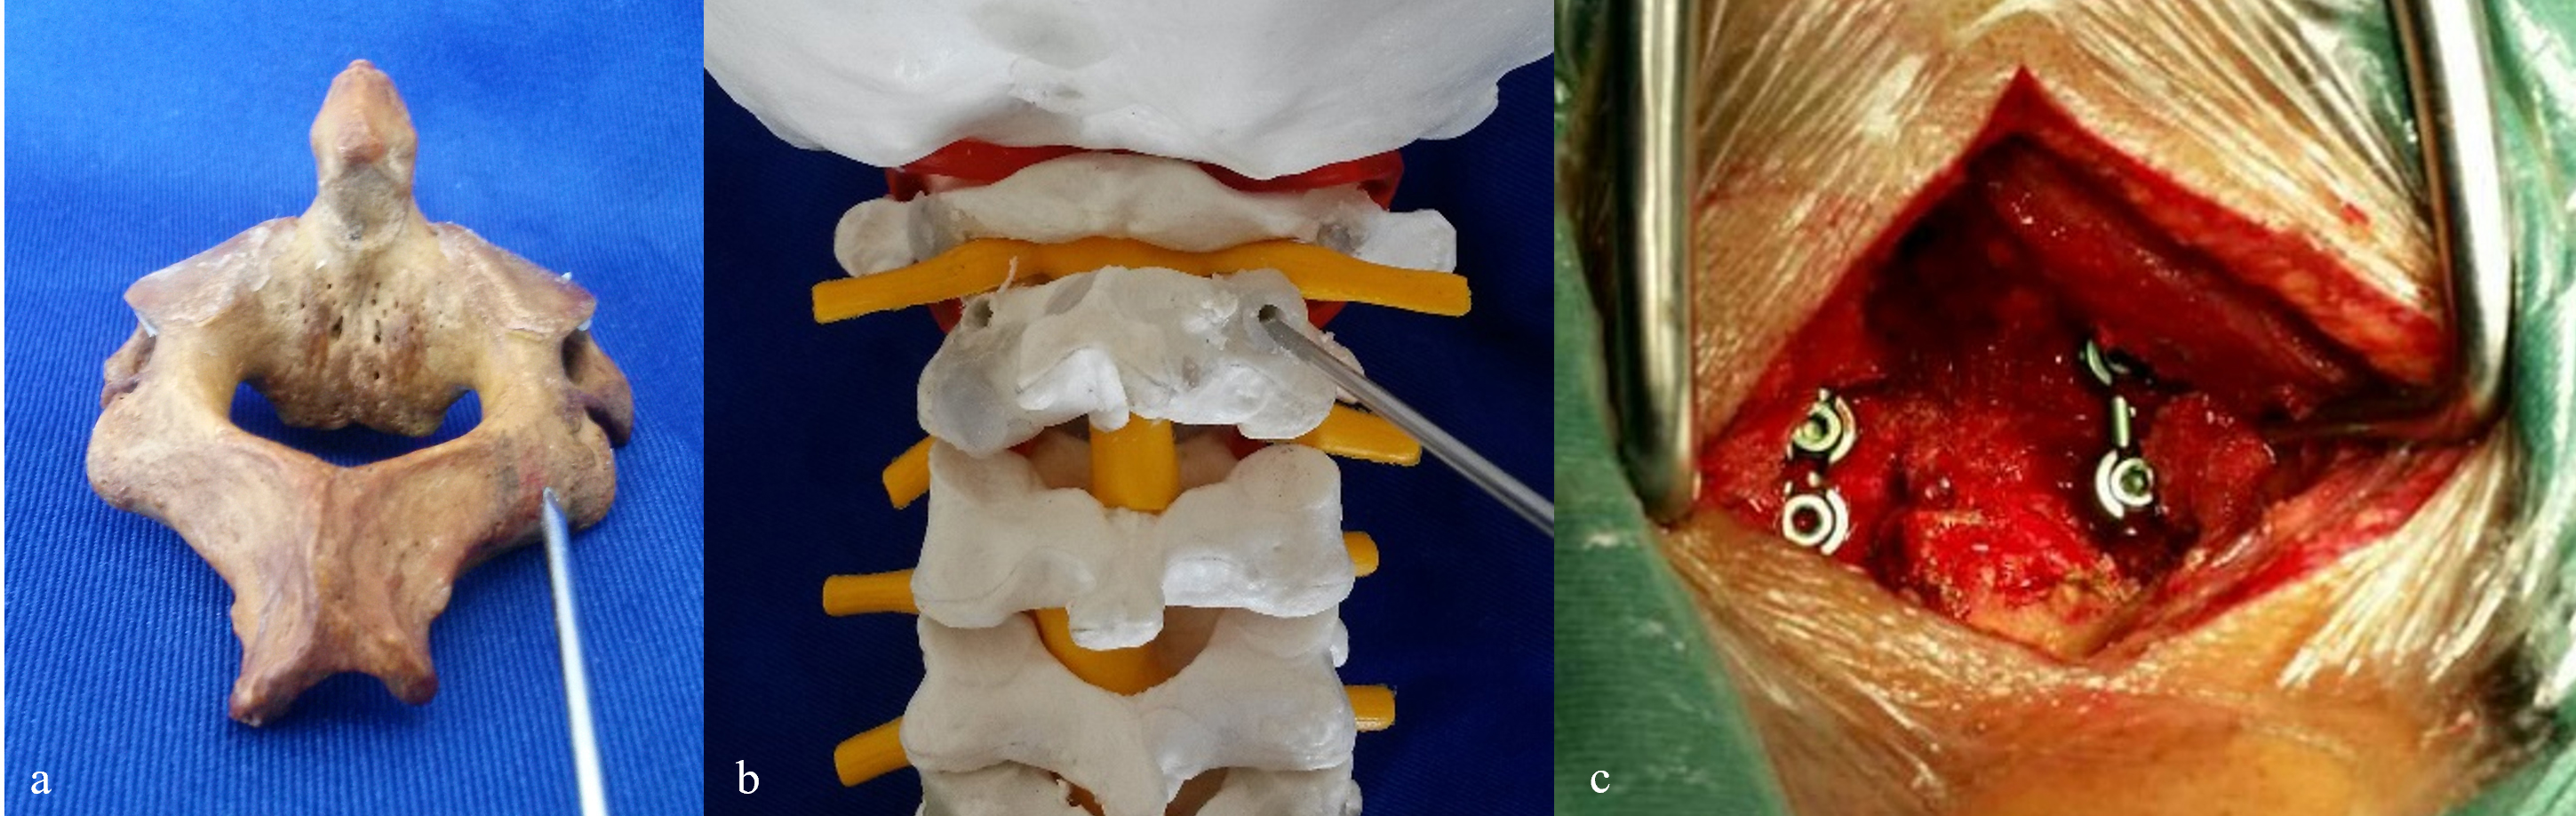 A, B: The entry point and direction of the C2 pedicle screw in the specimen and 3D printed model. C: Intraoperative placement of the C1–2 pedicle screws and connecting rods.